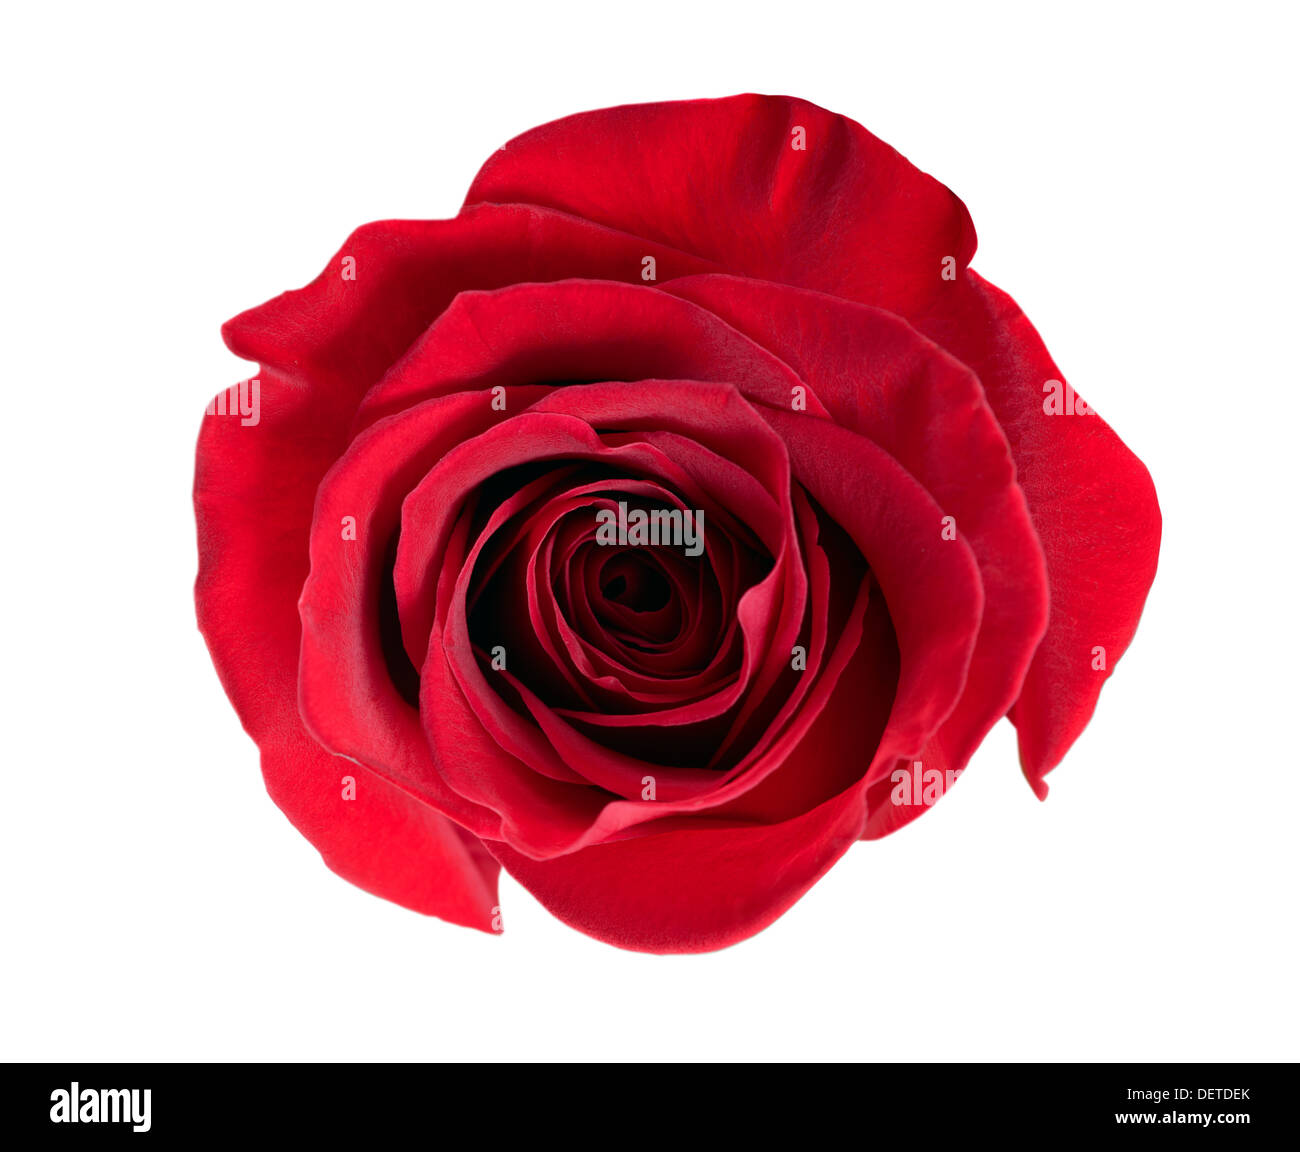 Red rose isolated on white Cut Out Stock Images & Pictures - Alamy